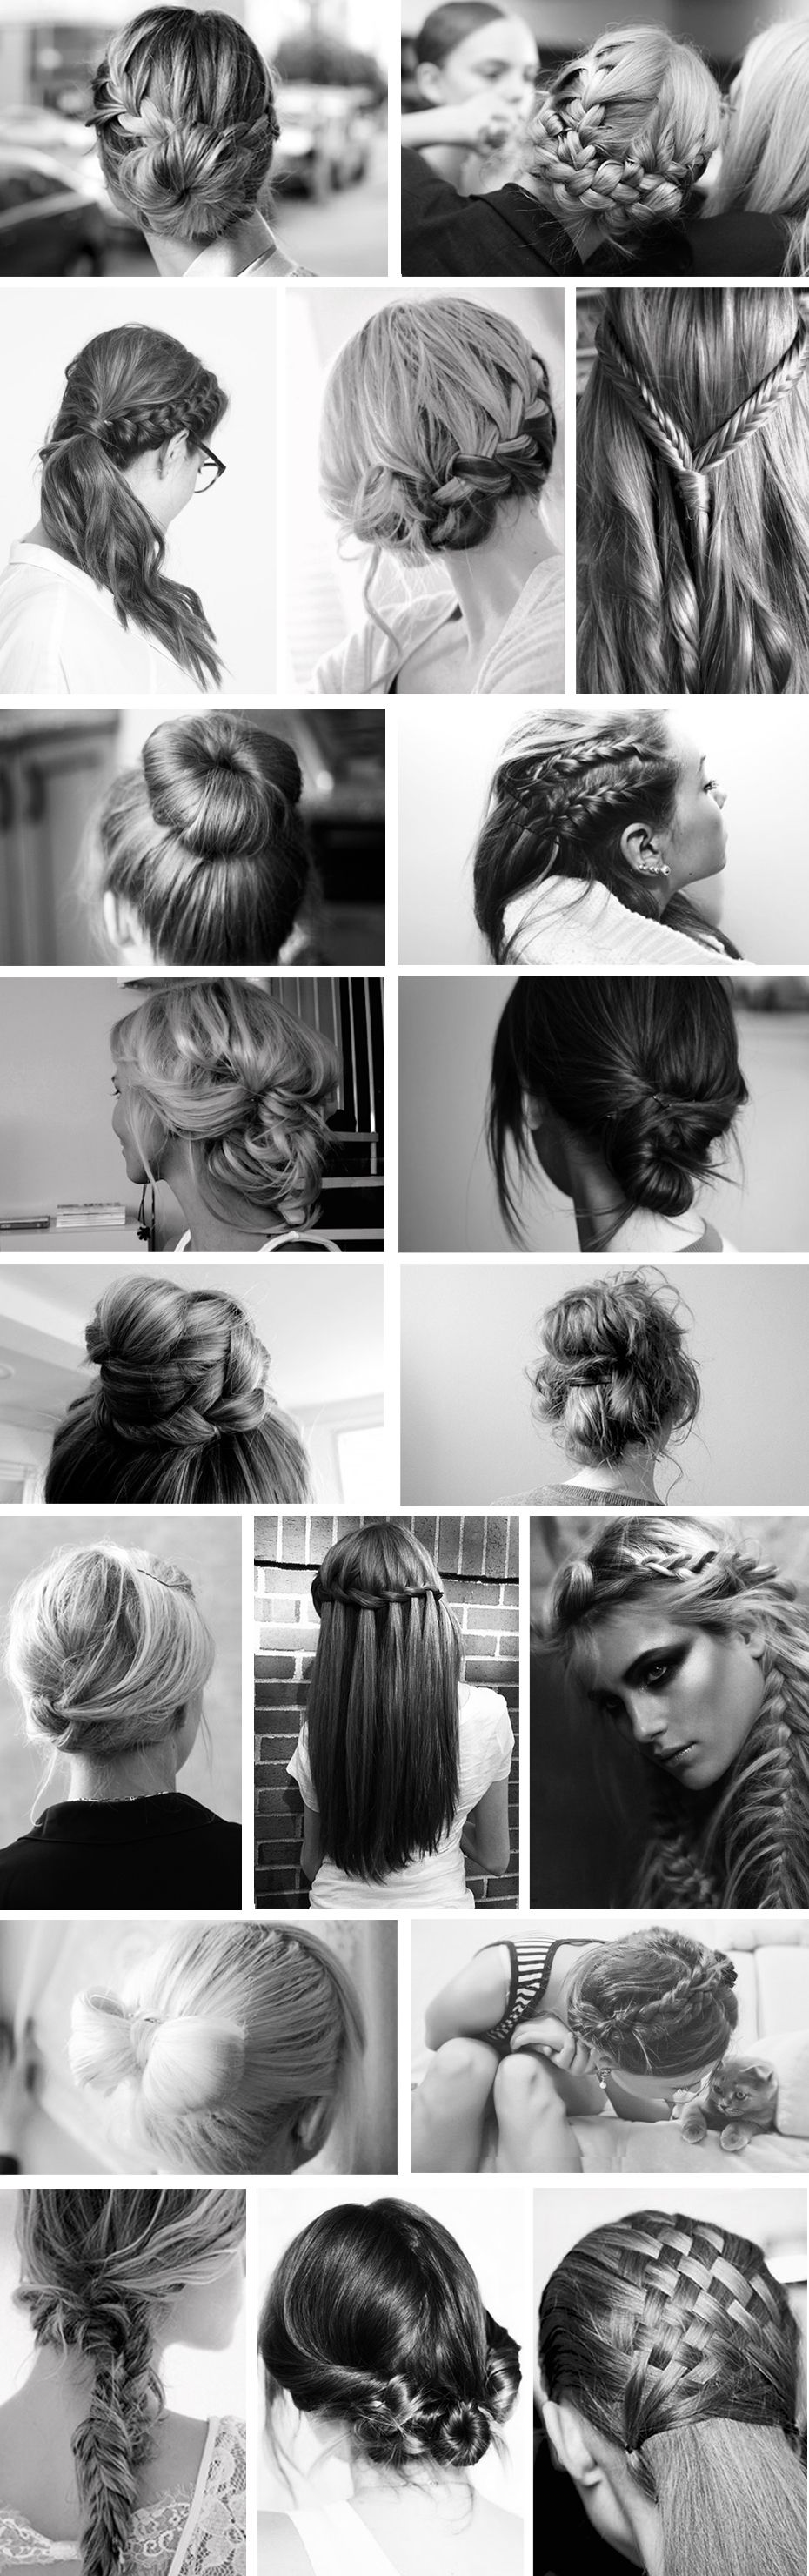 Hairstyle inspiration | Passions for Fashion